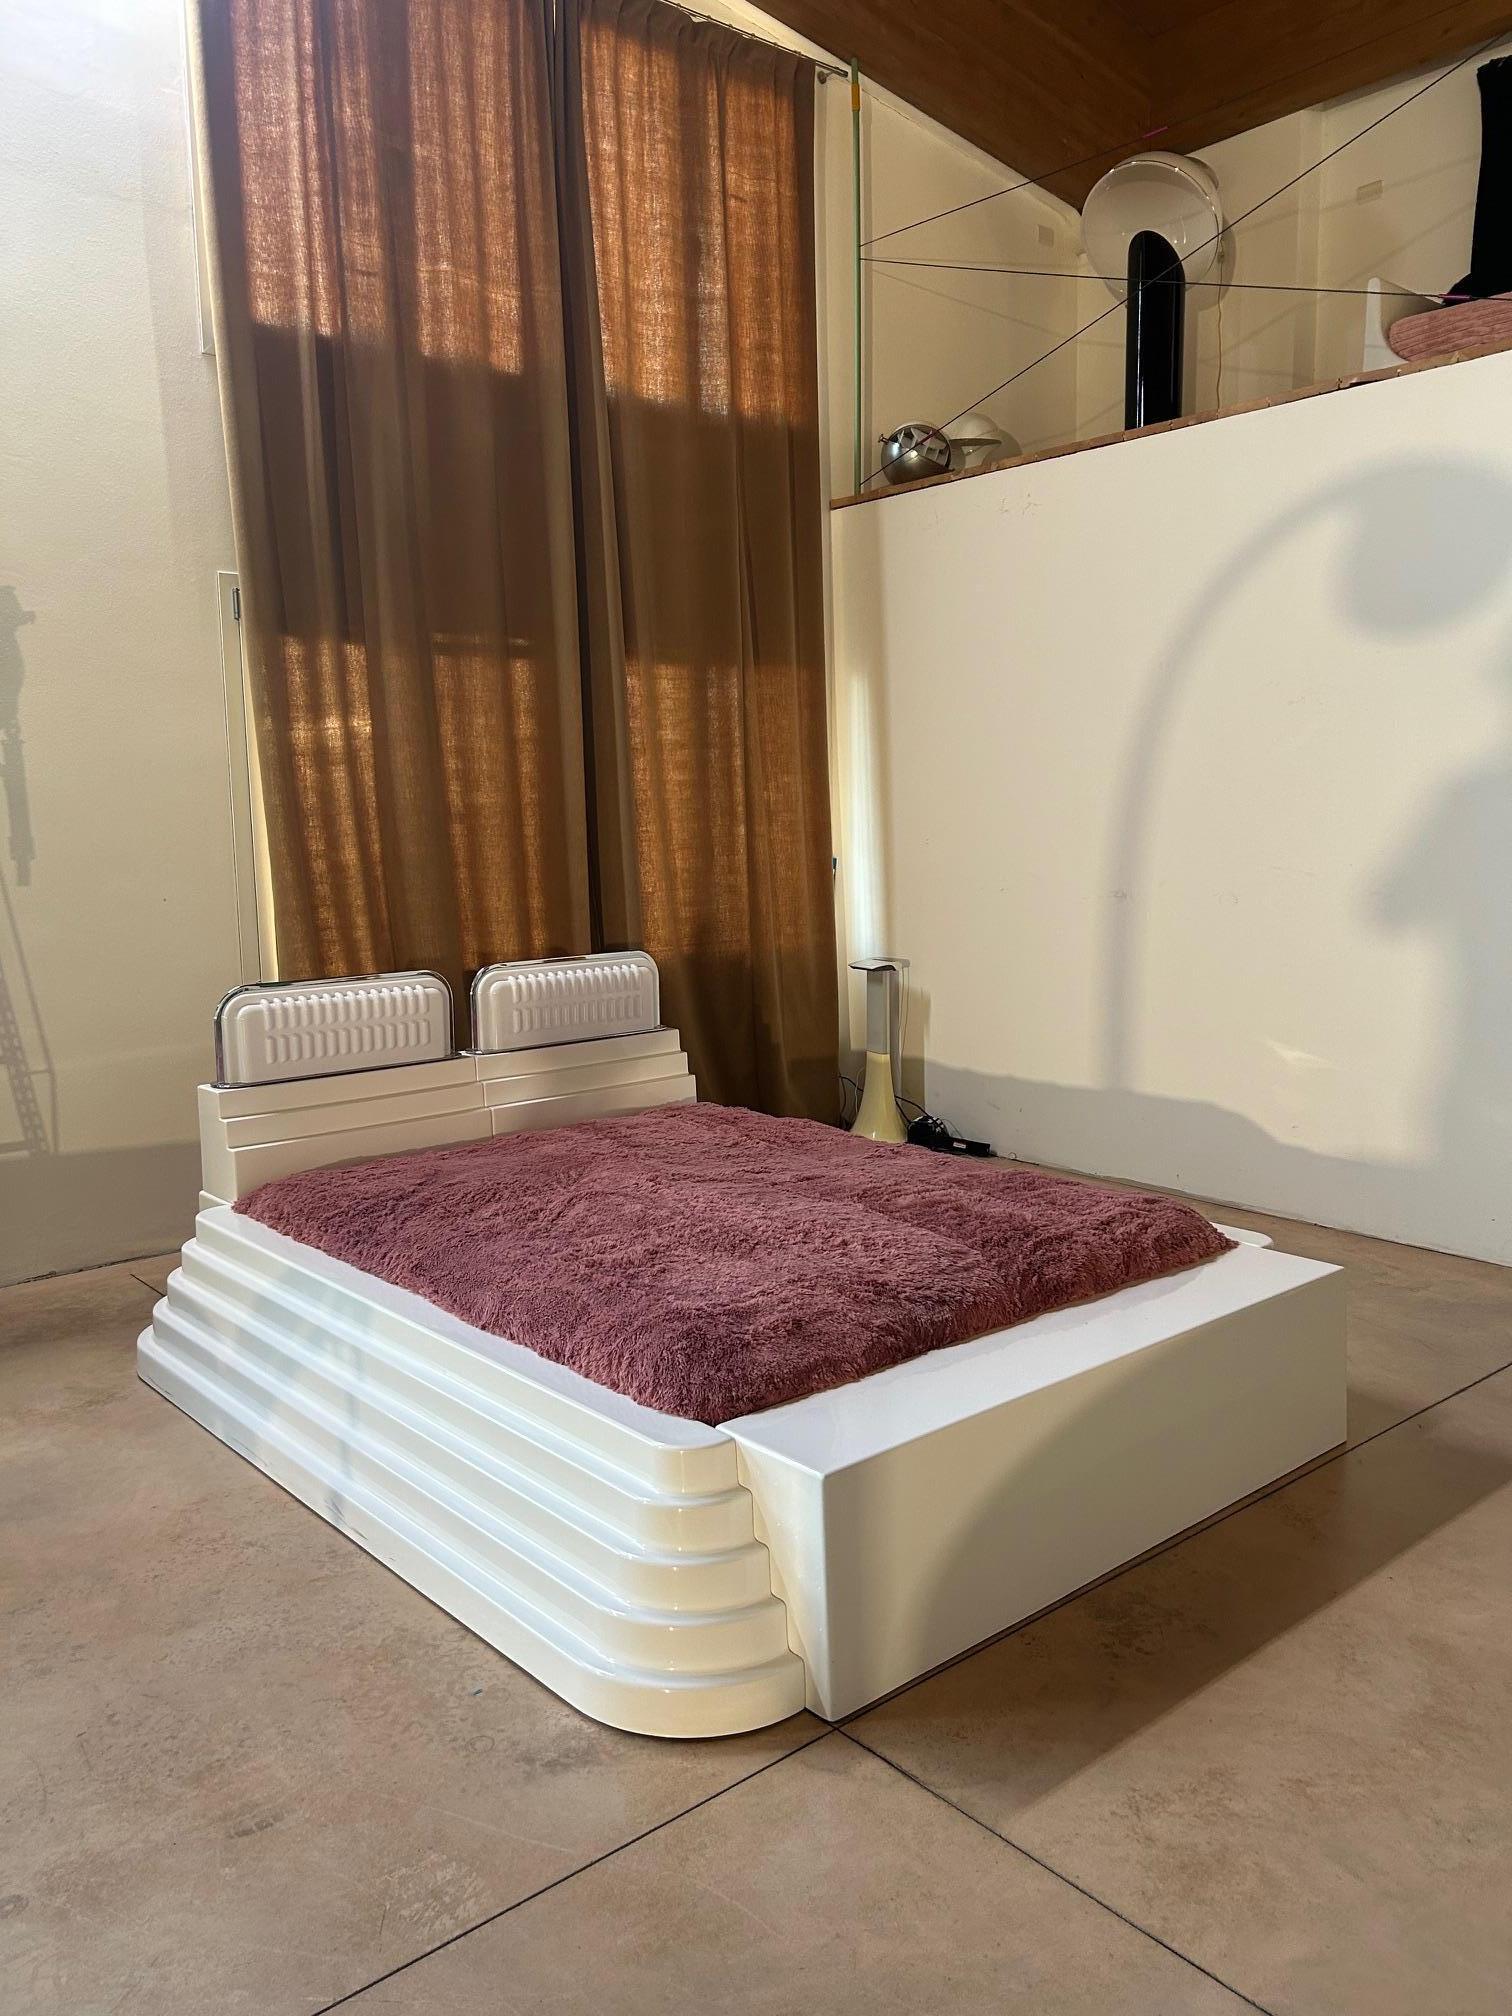 Large and rare double bed by Ettore Sottsass from the 1970 MOBILI GRIGI series with the pair of headboard lamps.  White colored resin frame reinforced with fibreglass. Poltronova Edition.  External bed dimensions: Depth 261 cm, width 220 cm, height